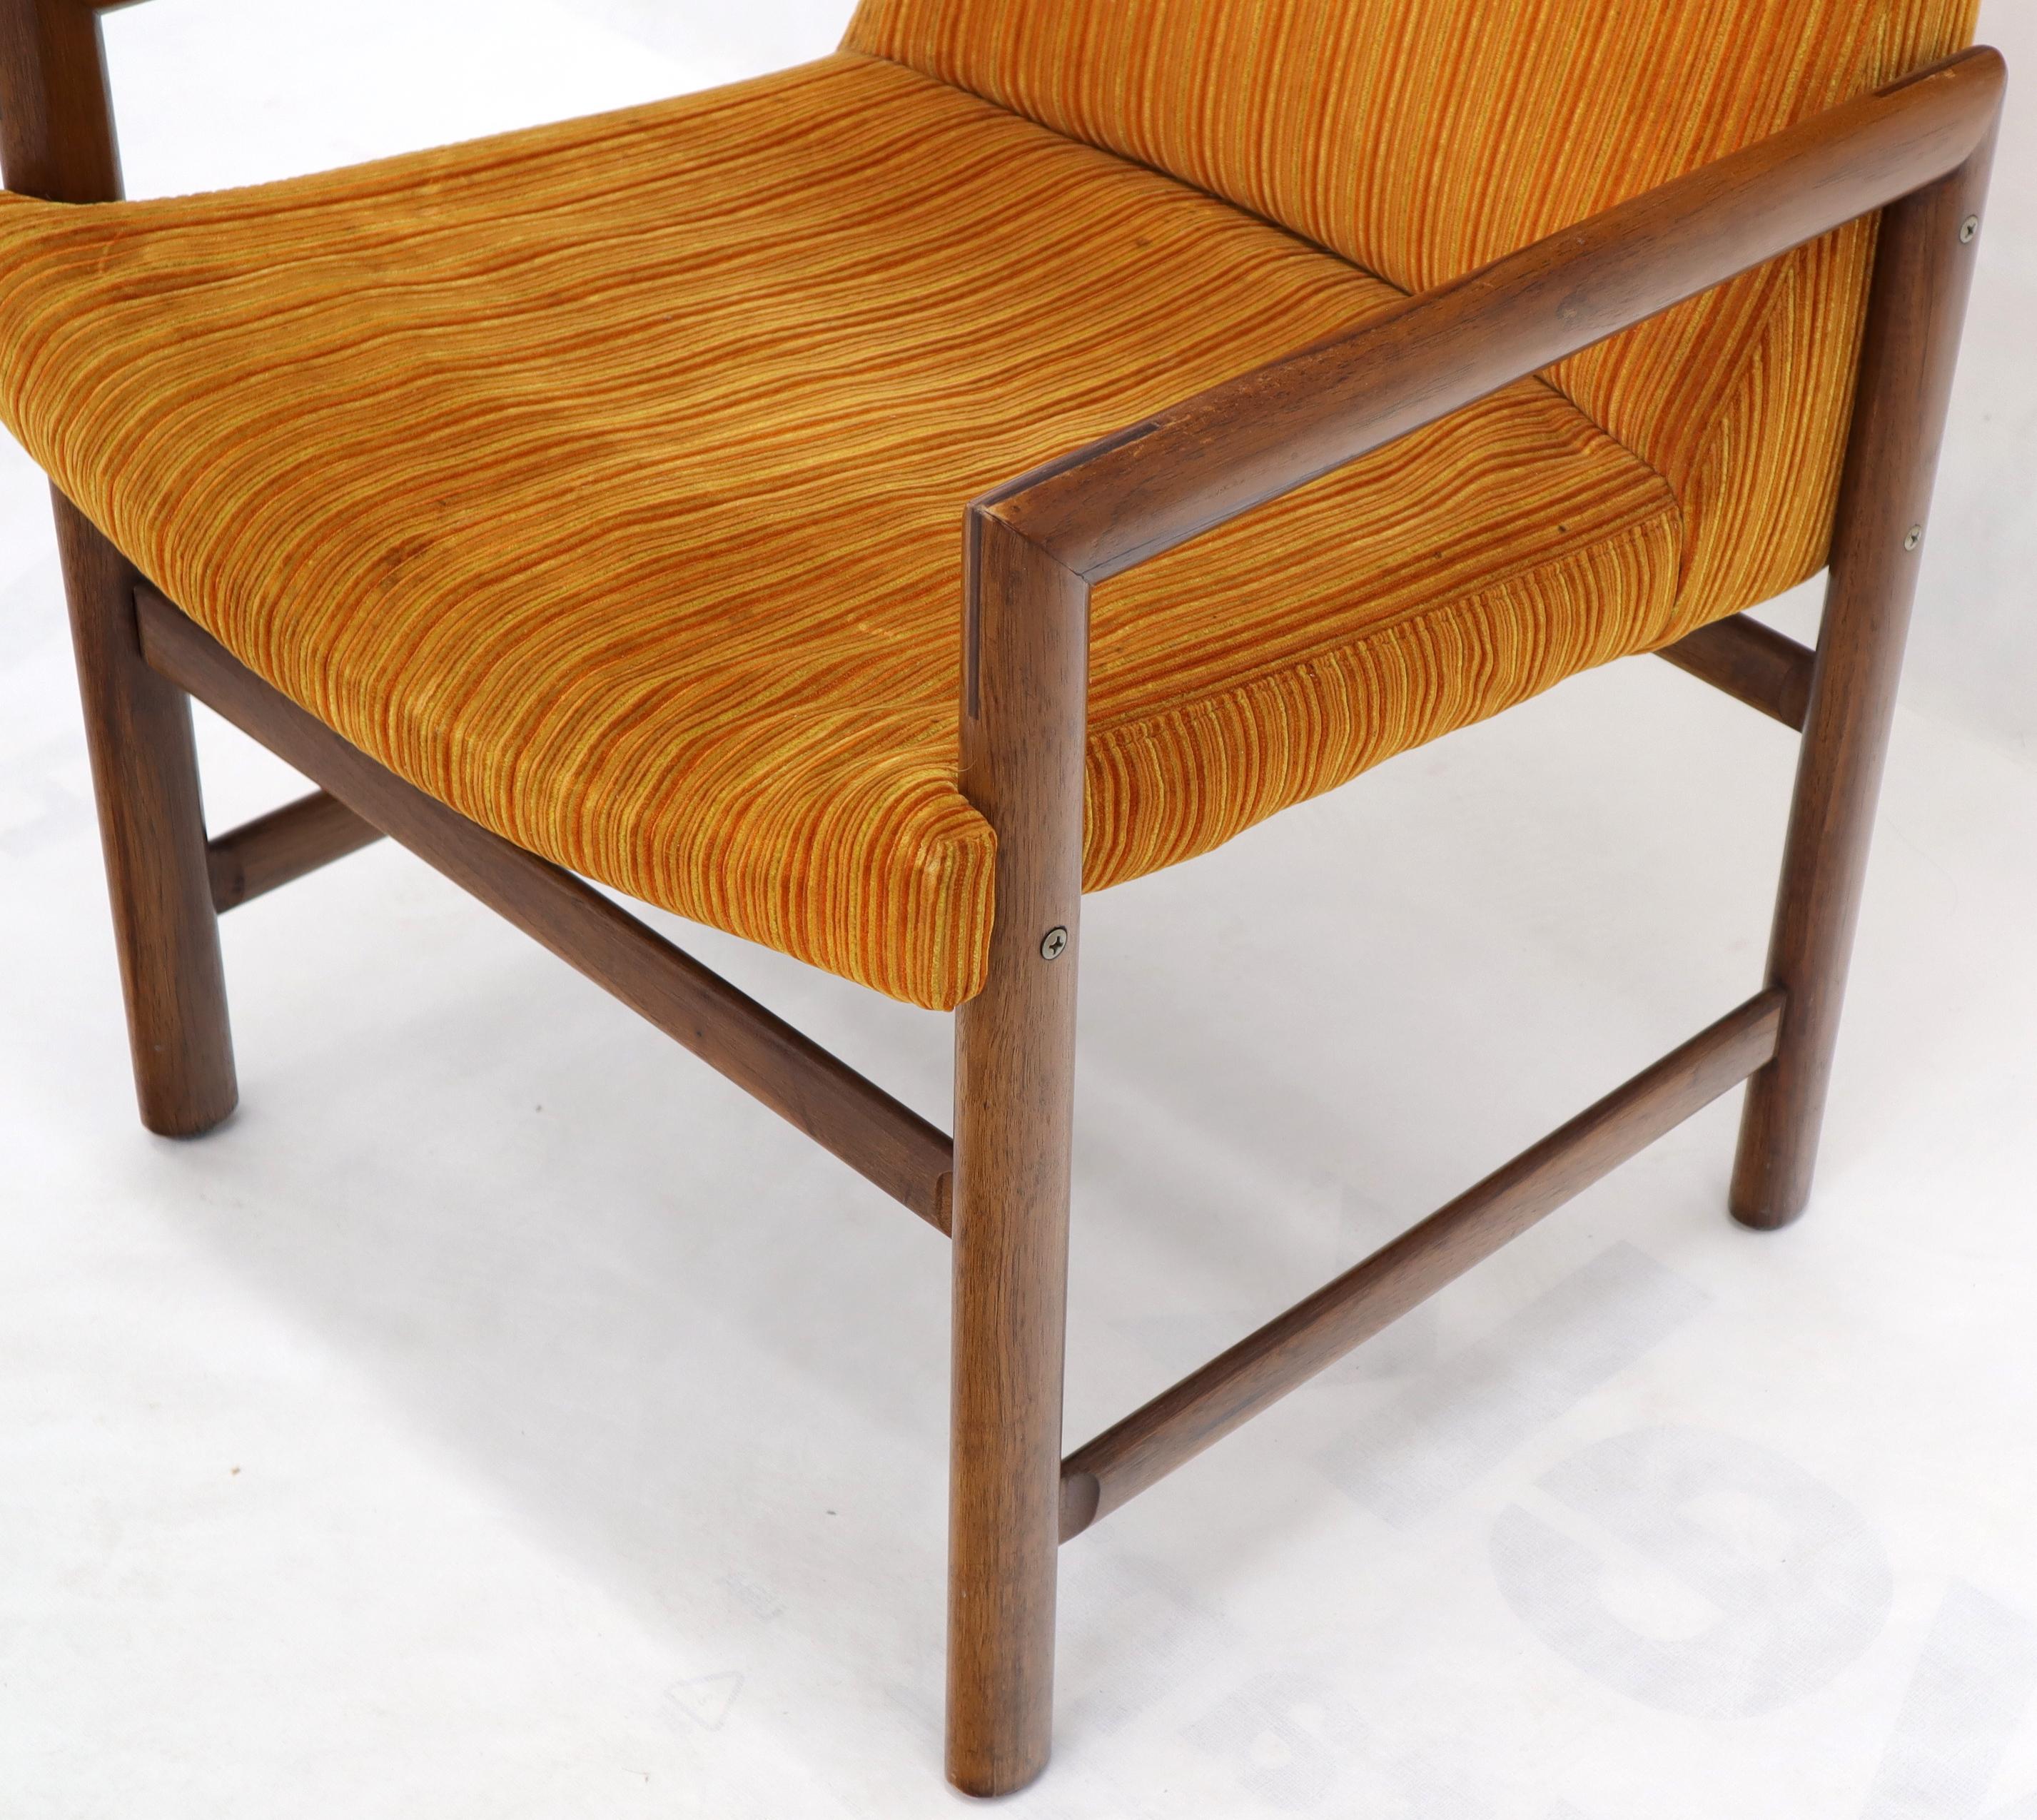 Set of 6 Mid-Century Modern Milo Baughman style chairs. Sturdy frames light signs of upholstery wear. Produced by Founders as part of their 